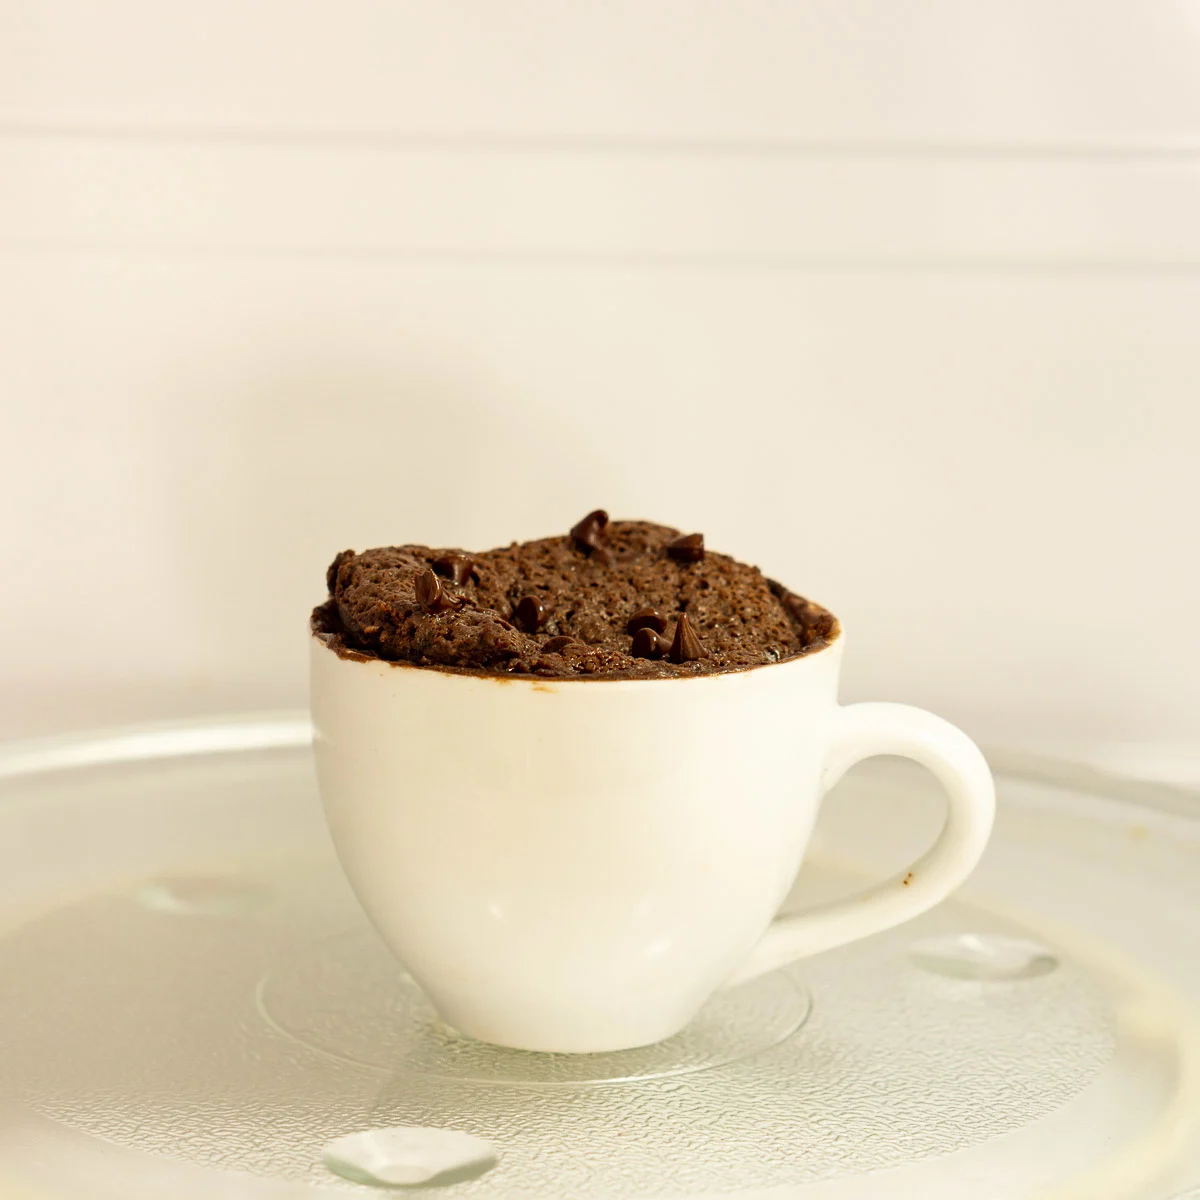 Protein brownie being cooked in a mug in the microwave